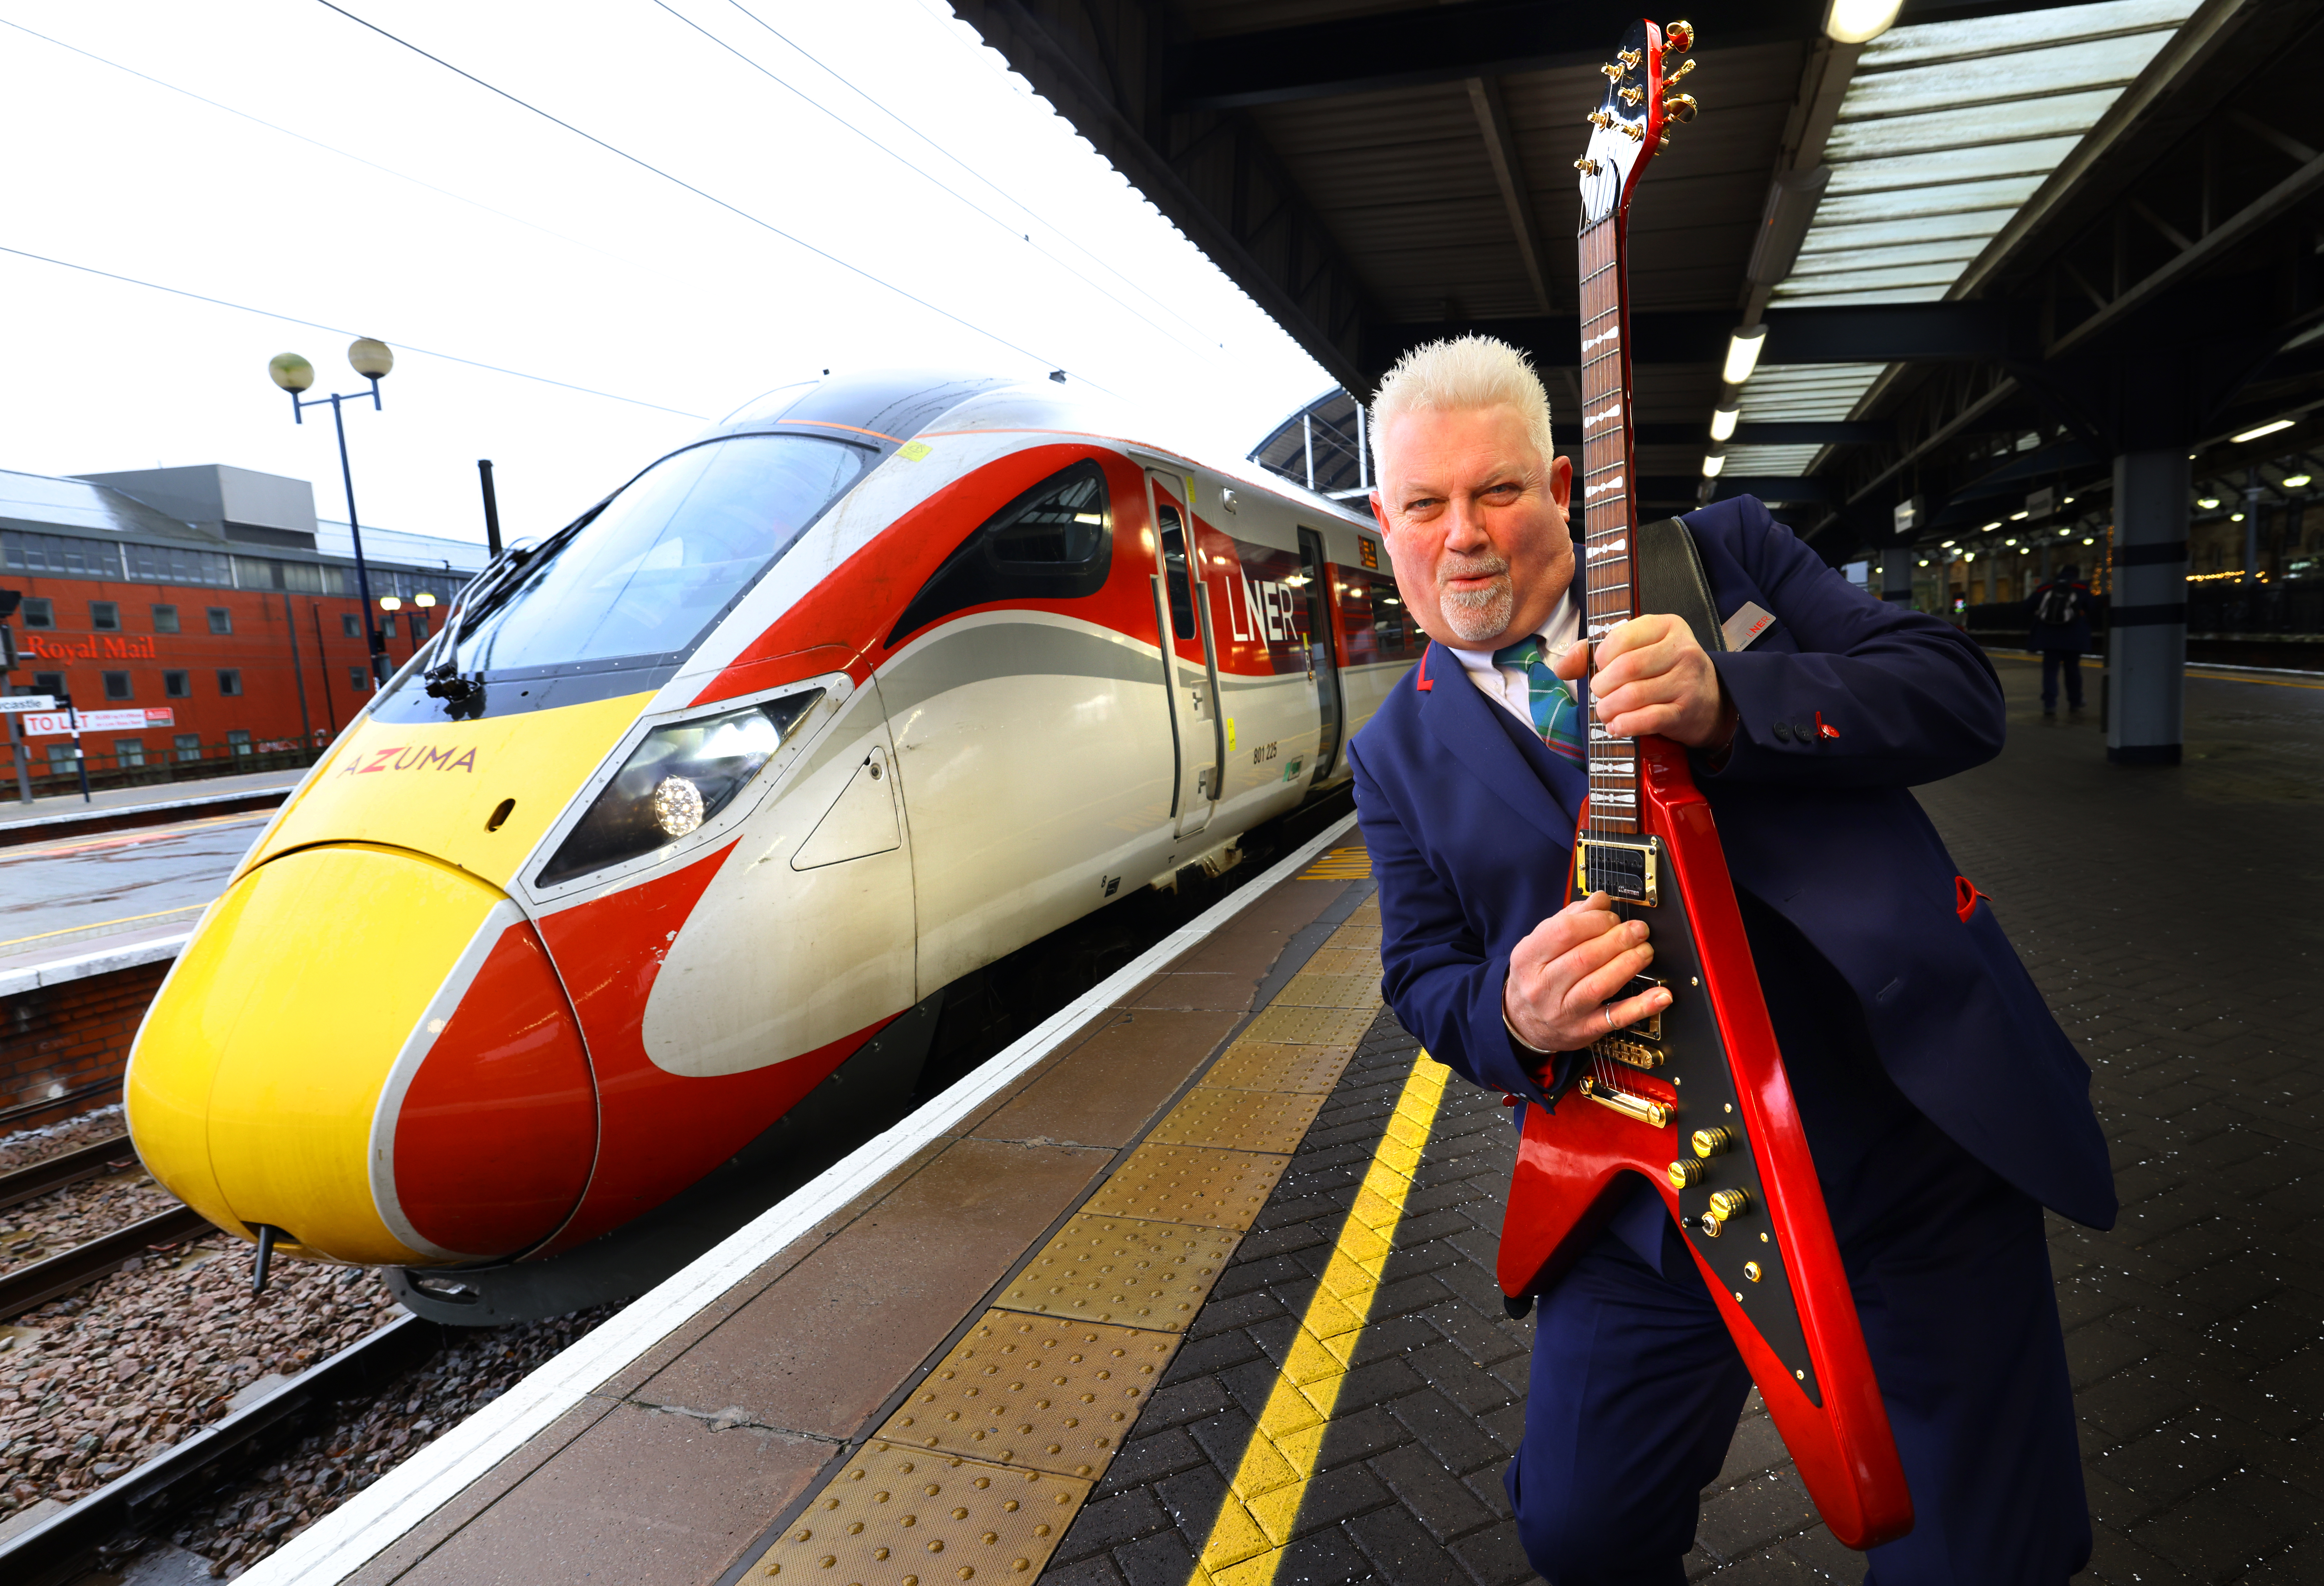 Introducing Rock and Rail Star Robb